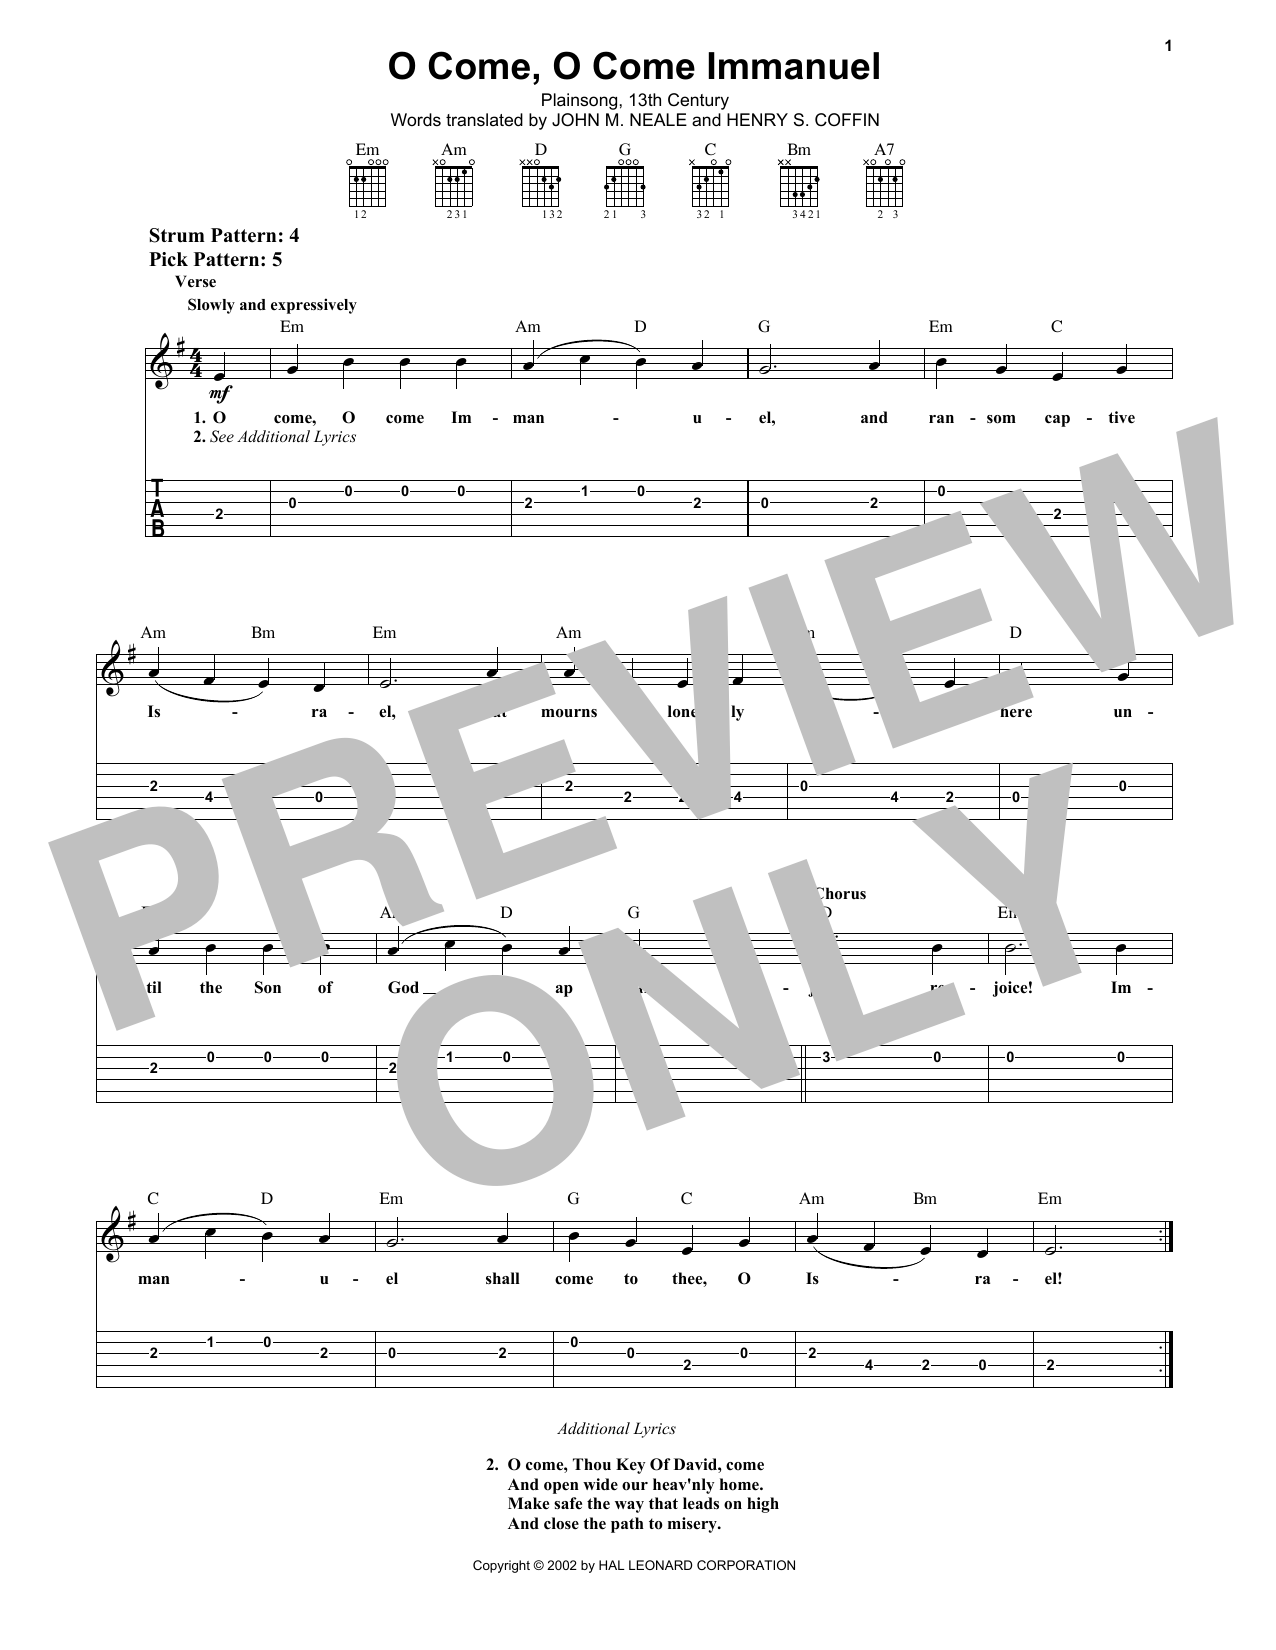 Plainsong, 13th Century O Come, O Come Immanuel sheet music notes and chords. Download Printable PDF.